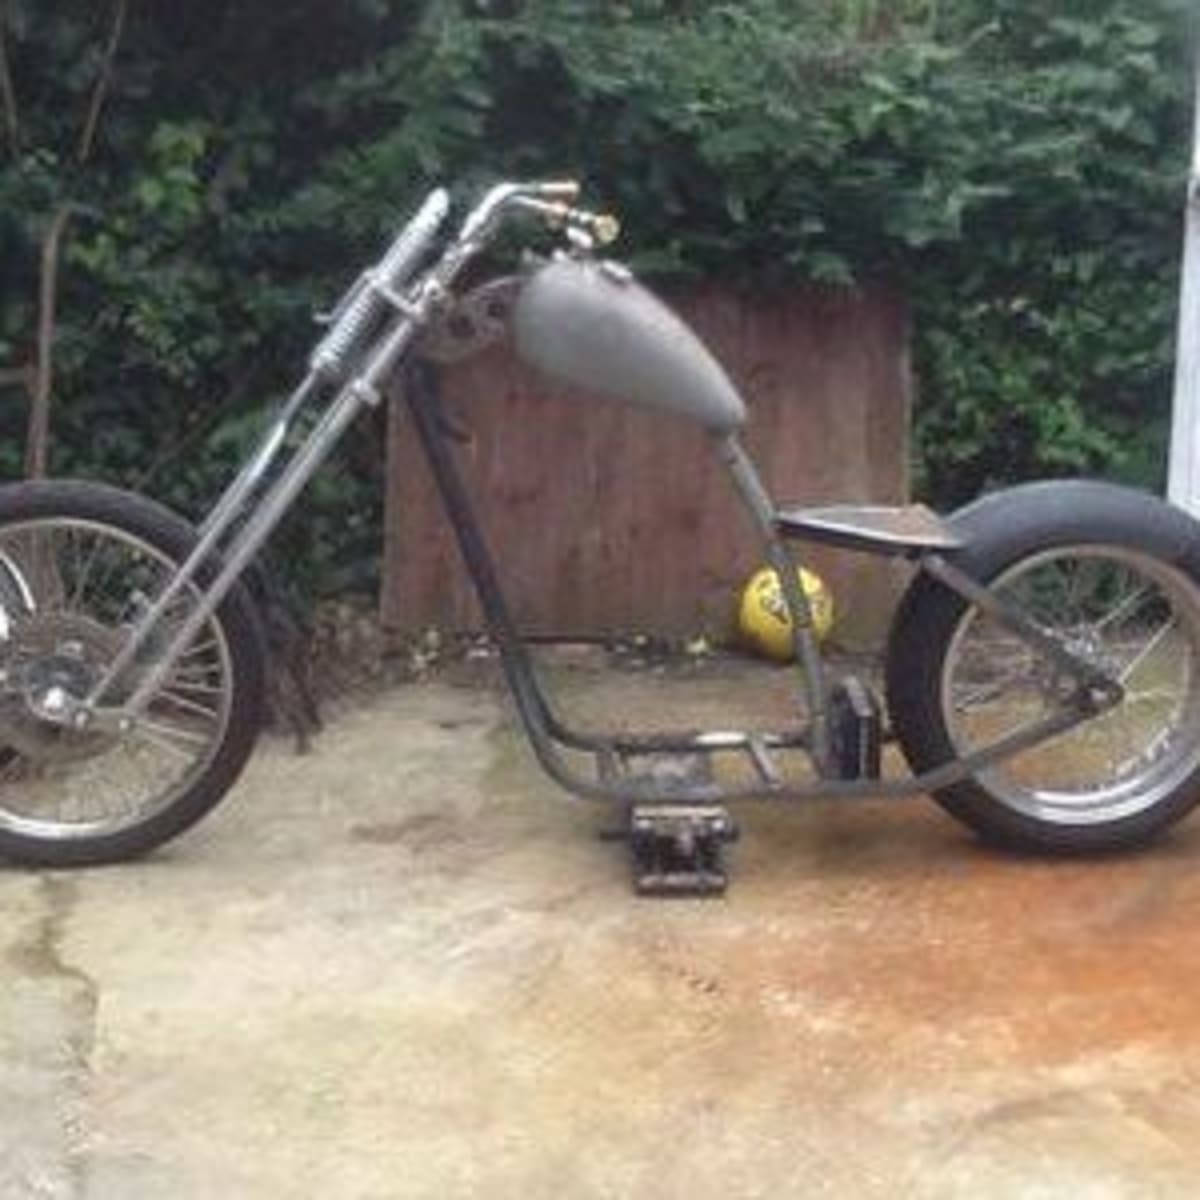 How To Build A Chopper Frame Axleaddict A Community Of Car Lovers Enthusiasts And Mechanics Sharing Our Auto Advice